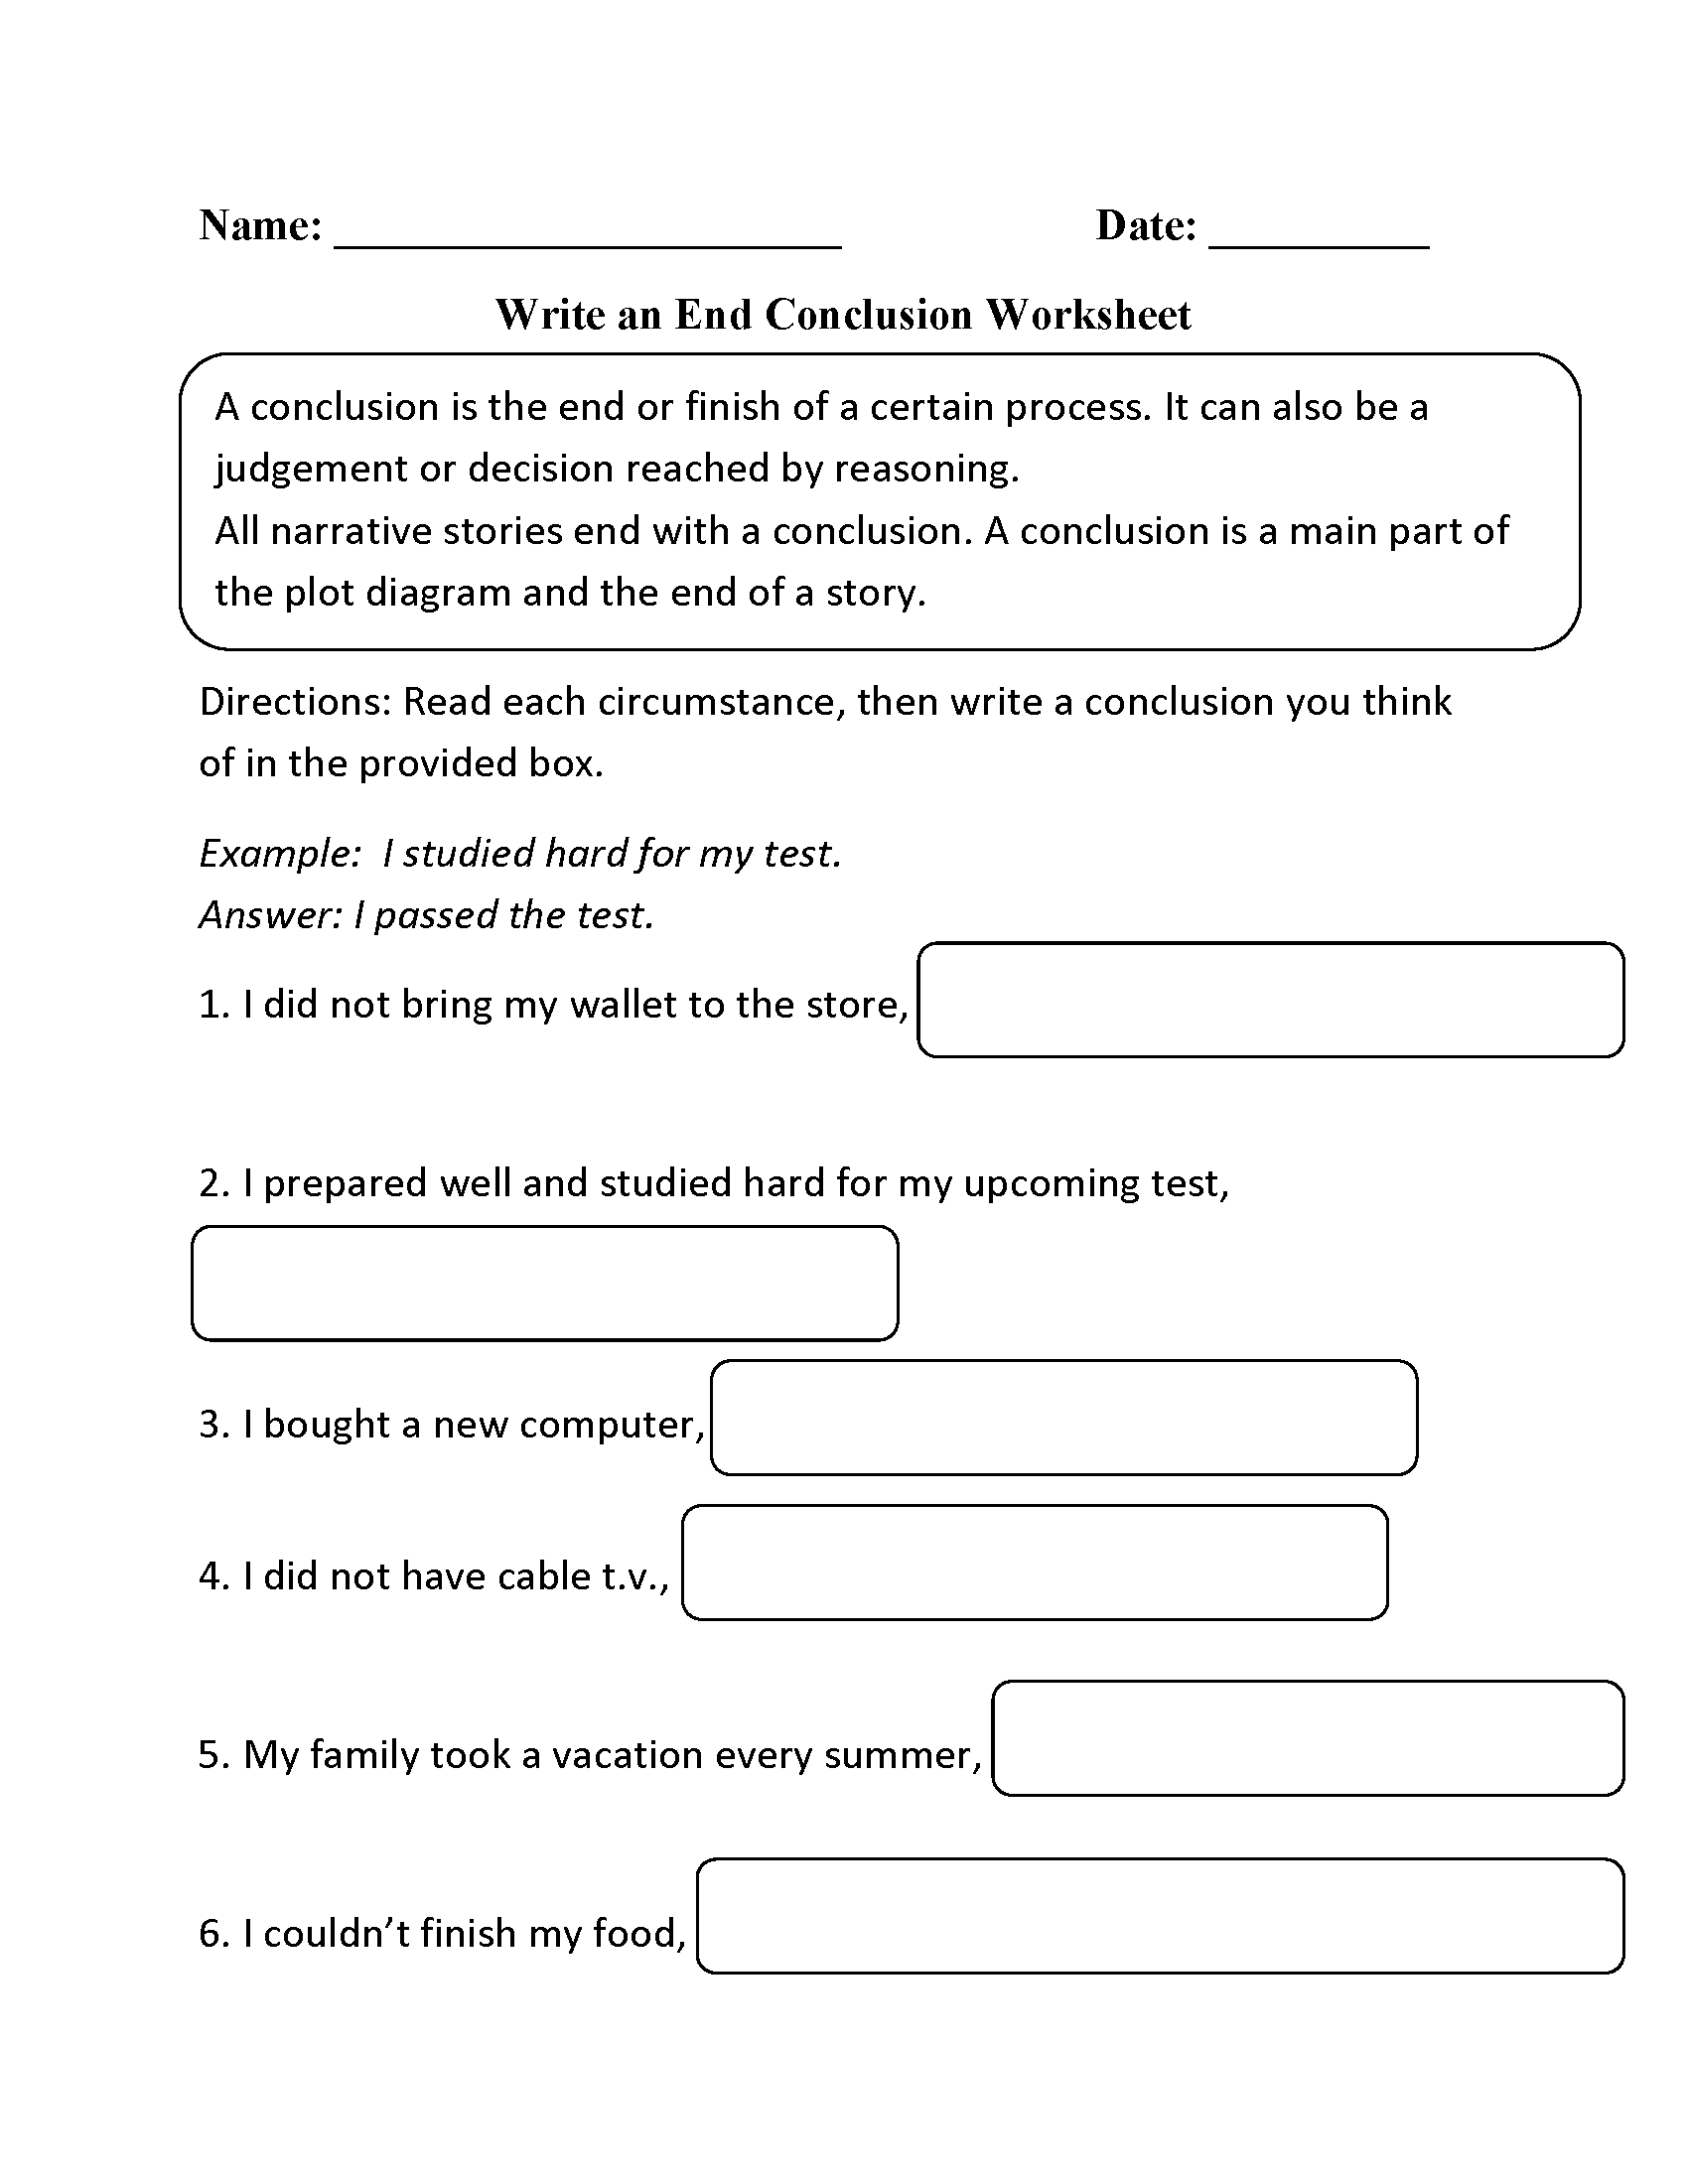 Write an End Conclusion Worksheet